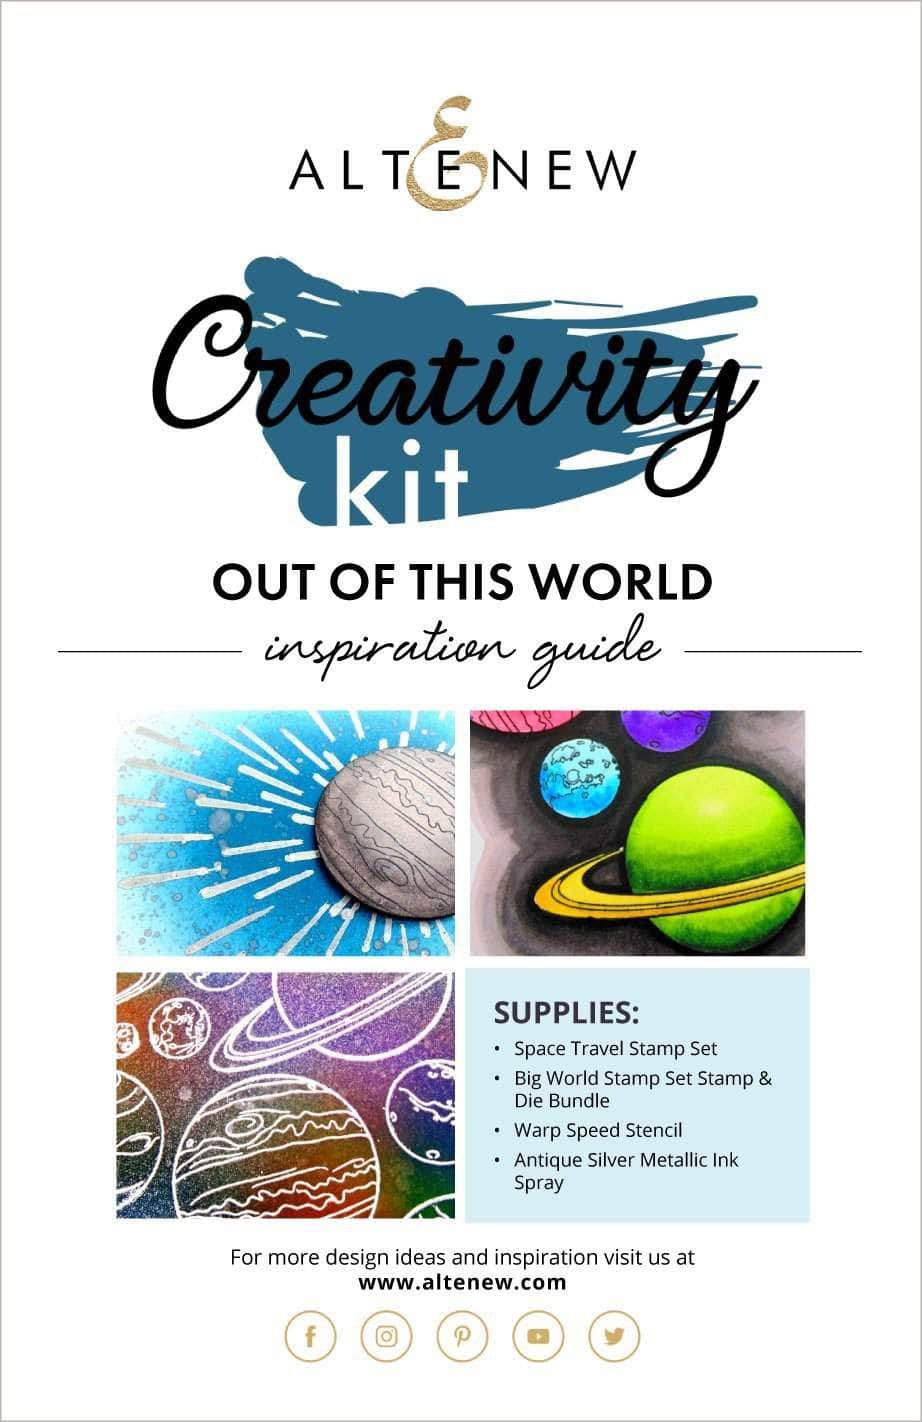 55Printing.com Printed Media Out of This World Creativity Kit Inspiration Guide